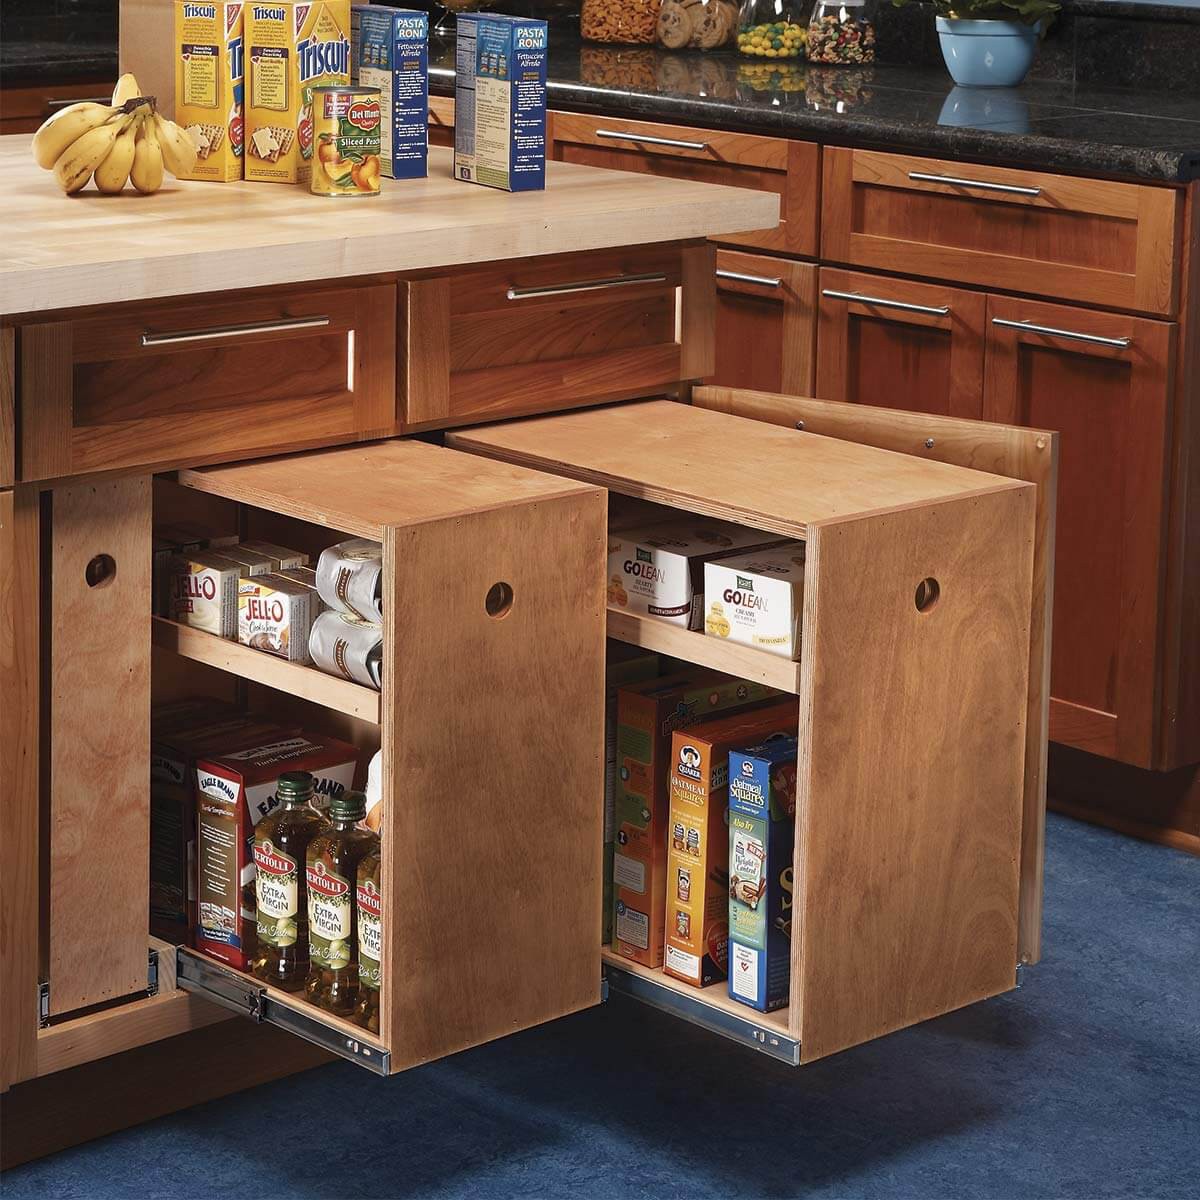 DIY Lower Cabinet Rollouts